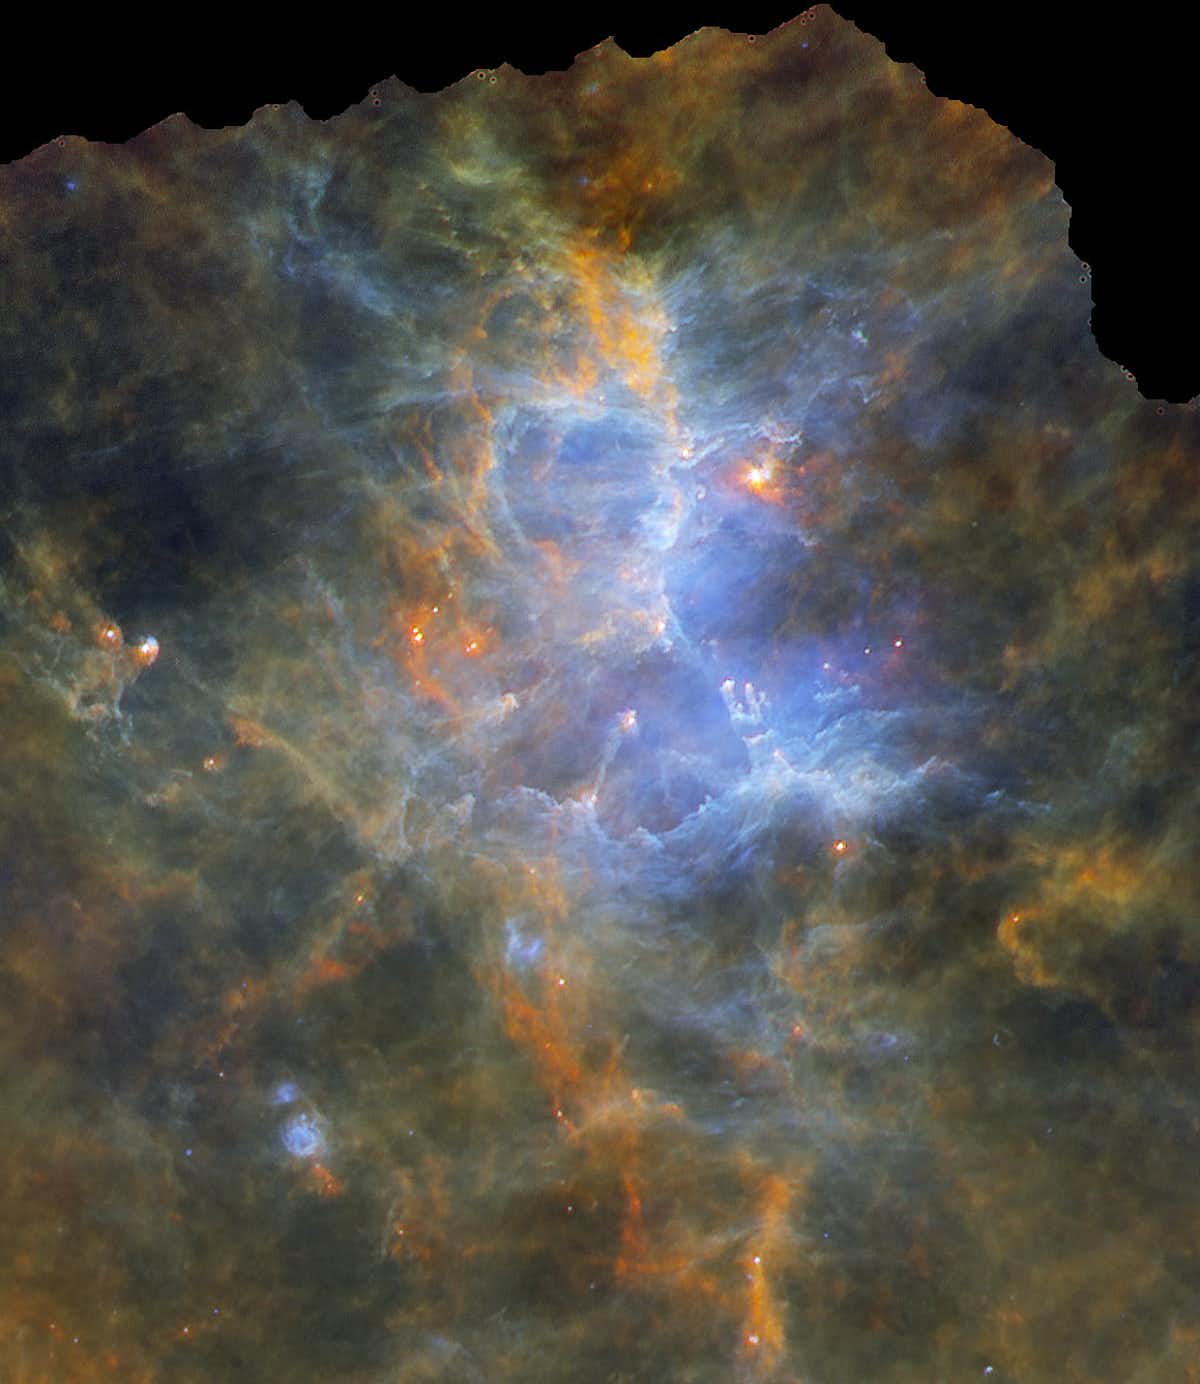 A giant cloud of molecular gas and dust creates this celestial looking imaged